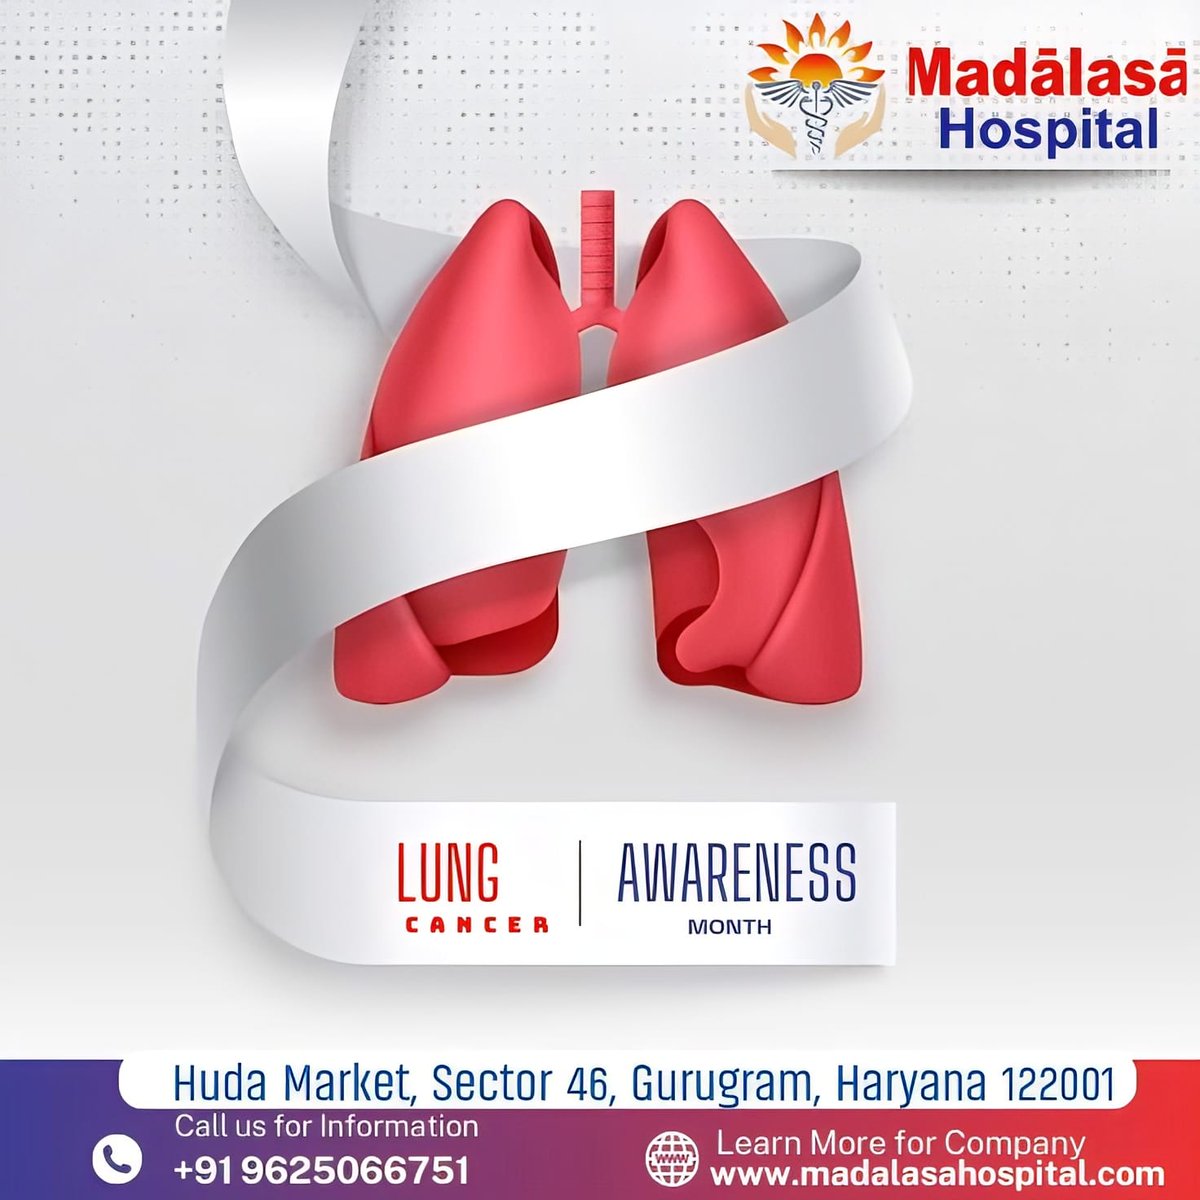 #LUNG CANCER AWARENESS MONTH
Contact us -
☎️ 9319 66 1010
👉madalasahospital.com
#lungcancerfighter 
#BreathofHope
#LungCancerWarrior
#NoStigmaWithLungs
#breathstrong